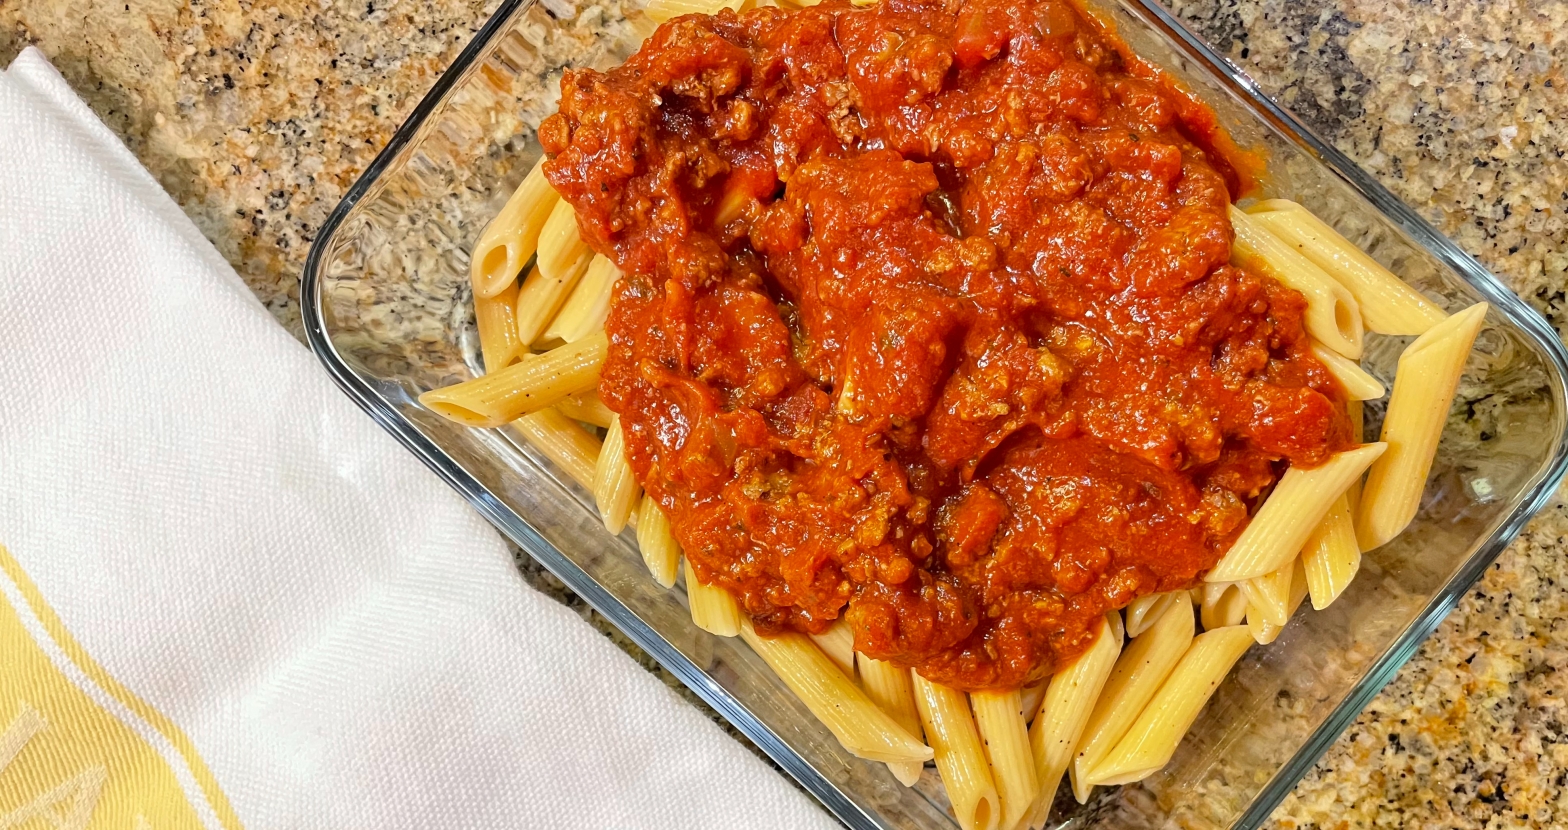 Leftover bean pasta with meat sauce makes a perfect lunch for the next day.